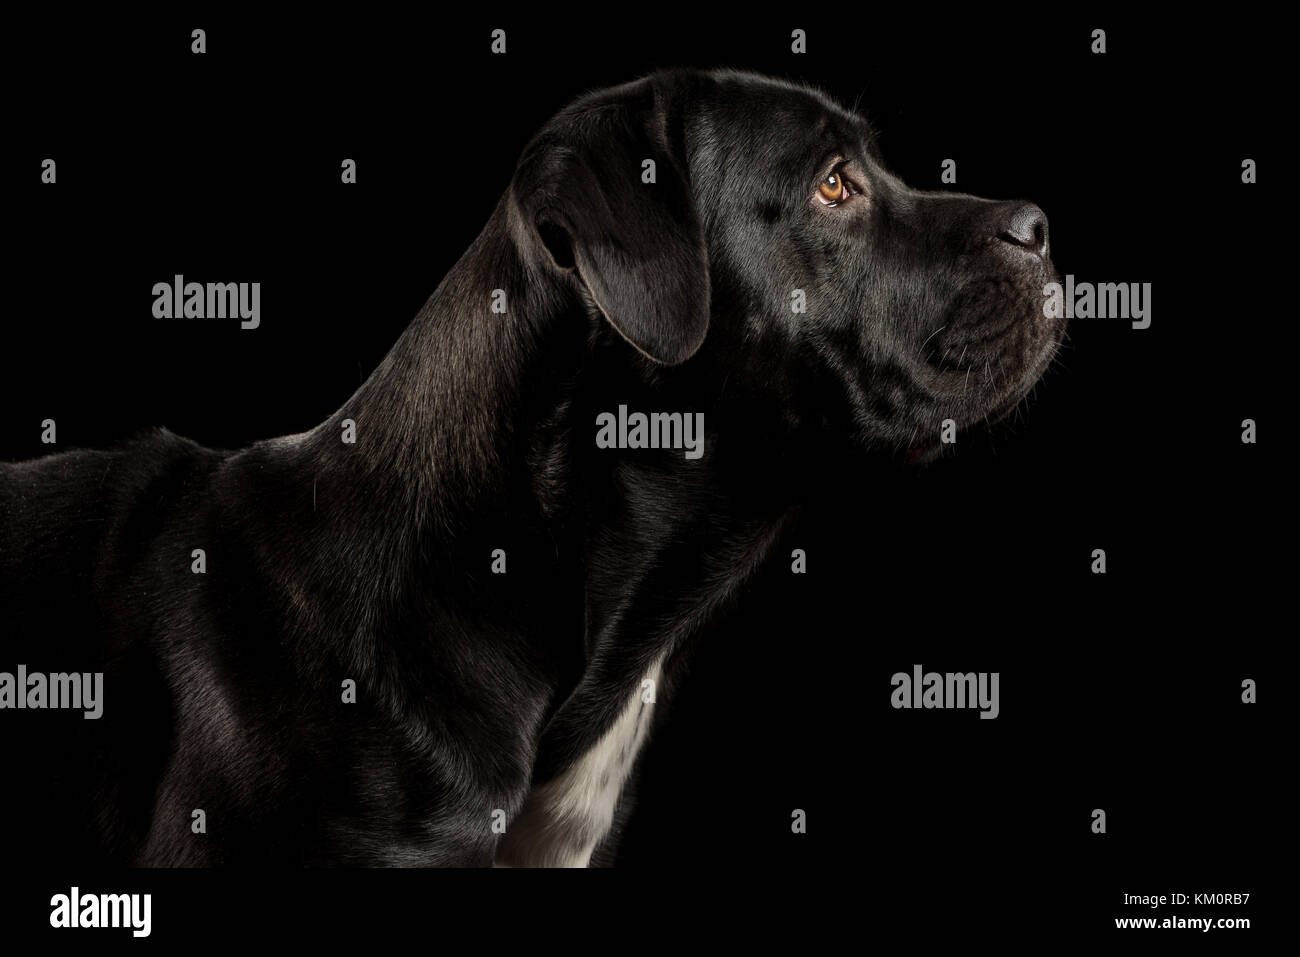 Portrait Of A Cane Corso Dog Breed On A Black Background